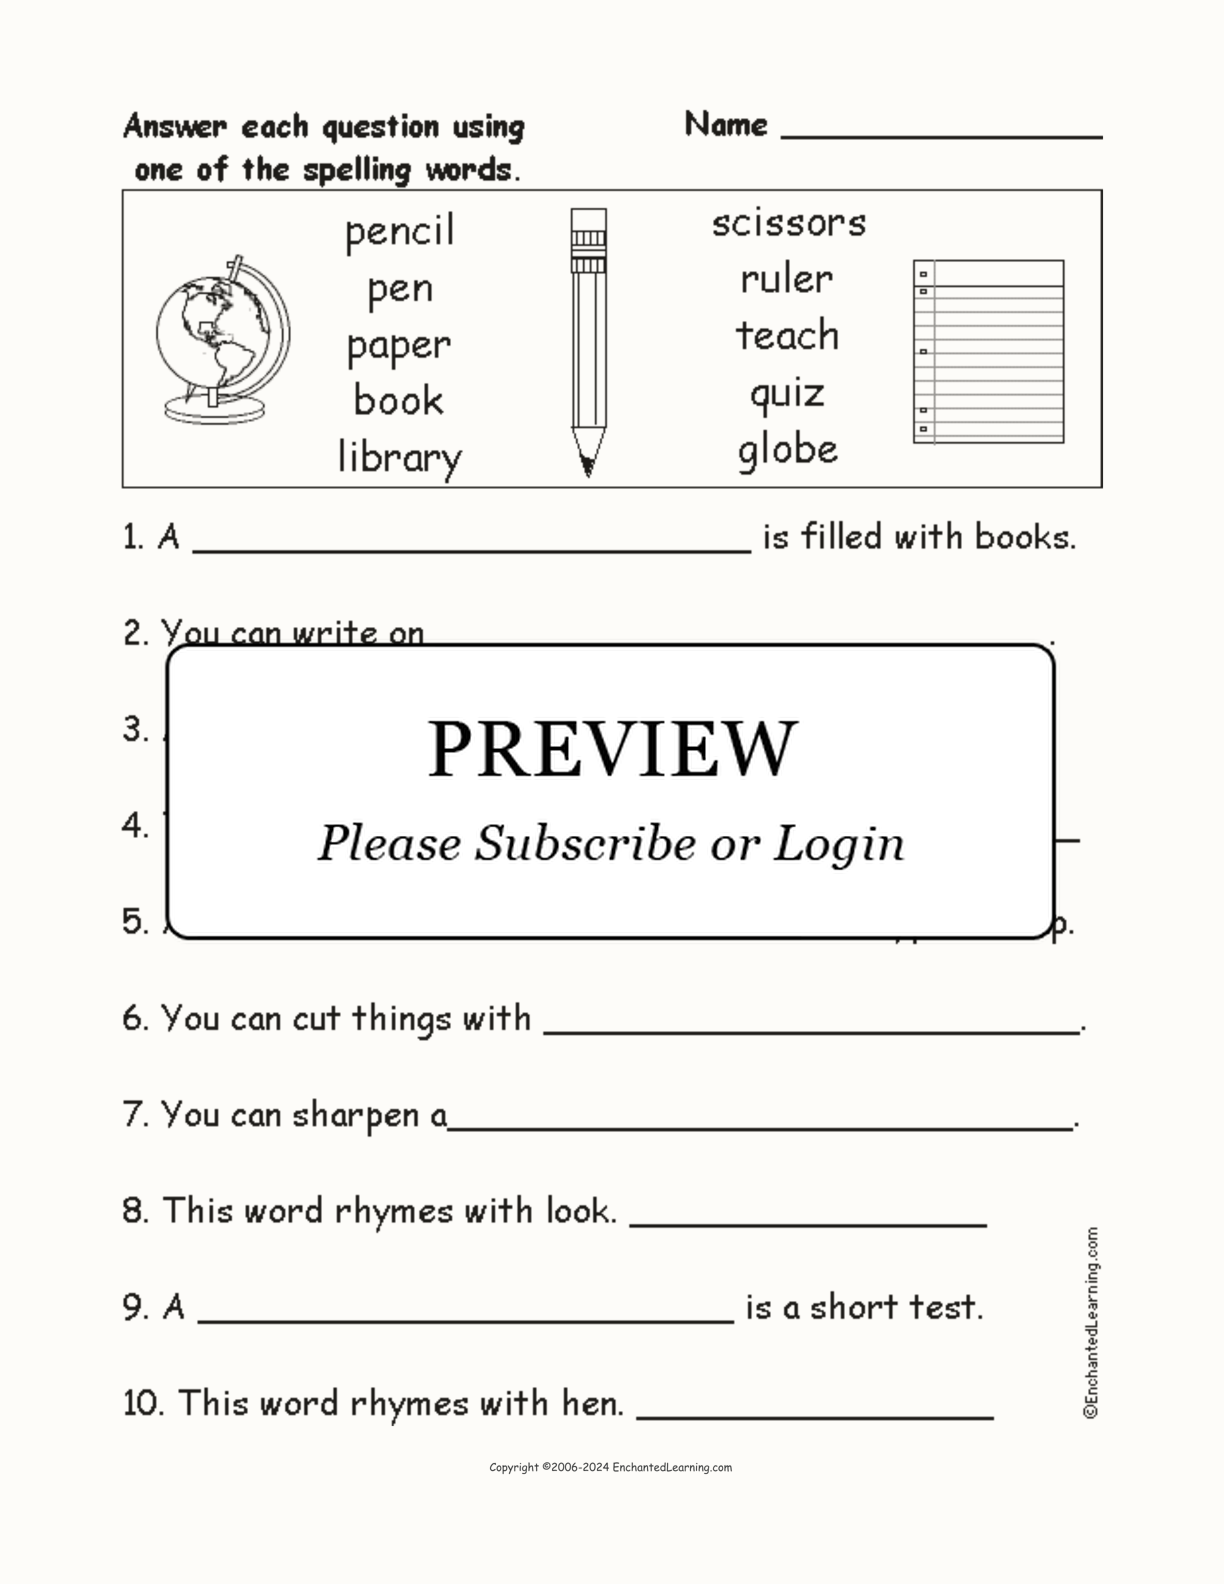 School Spelling Word Questions interactive worksheet page 1